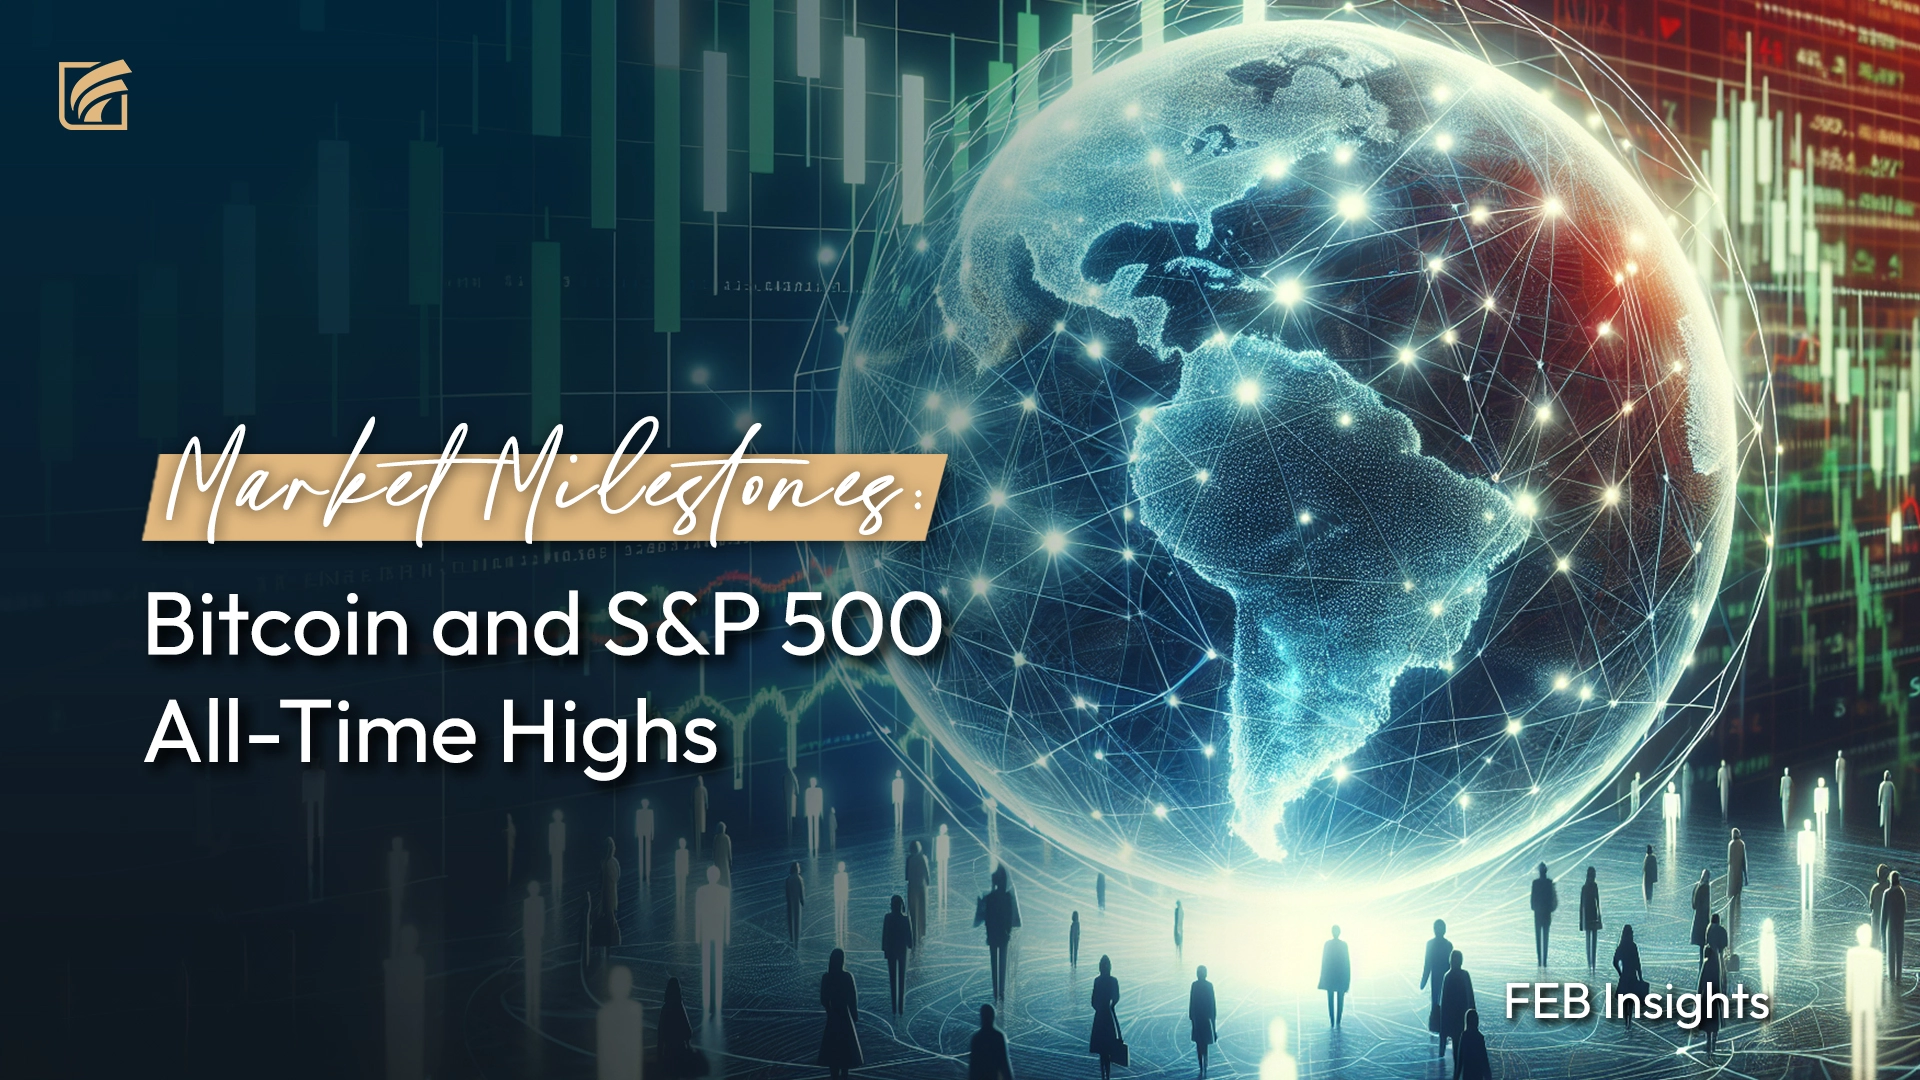 Market Milestones: Bitcoin and S&P 500 All-Time Highs